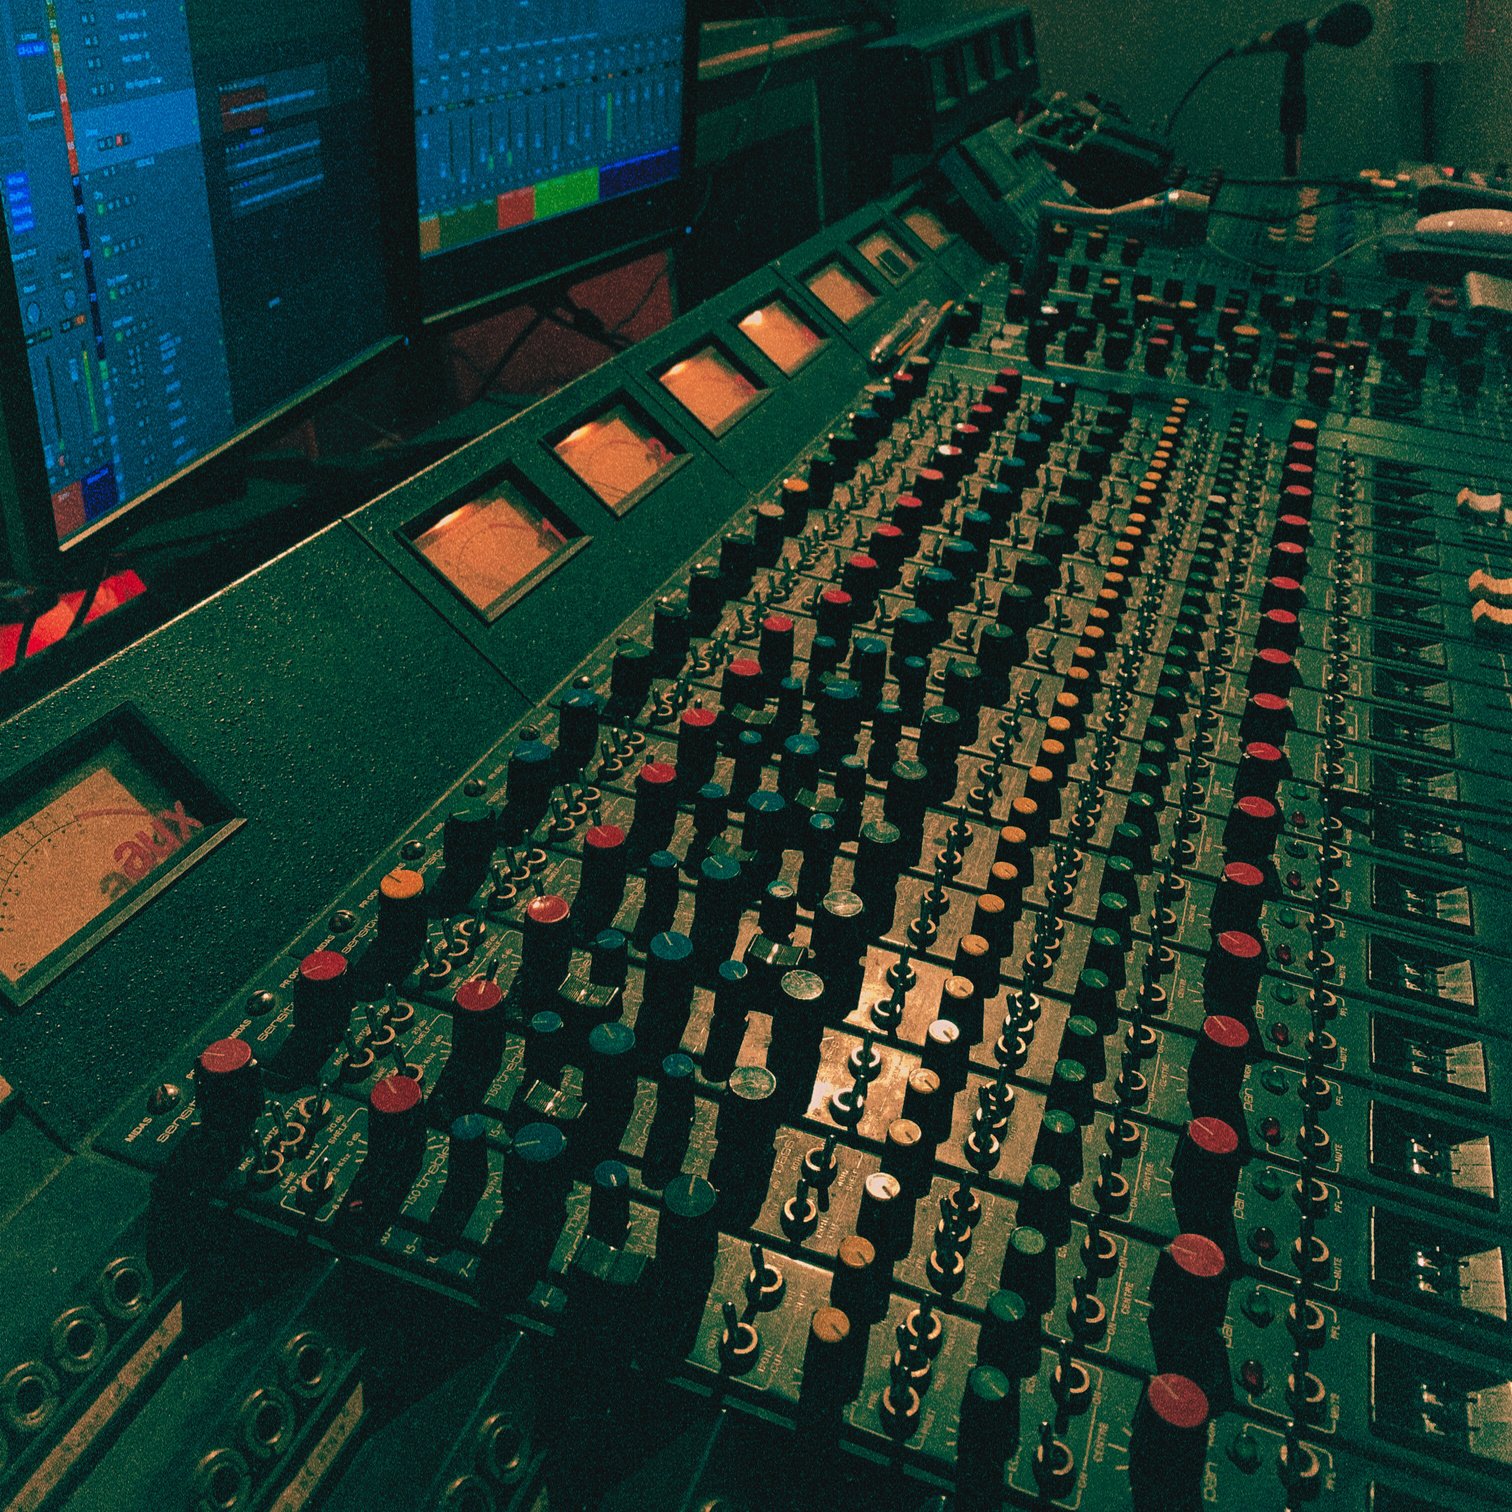 the MIDAS mixing desk, hand wired in 1975